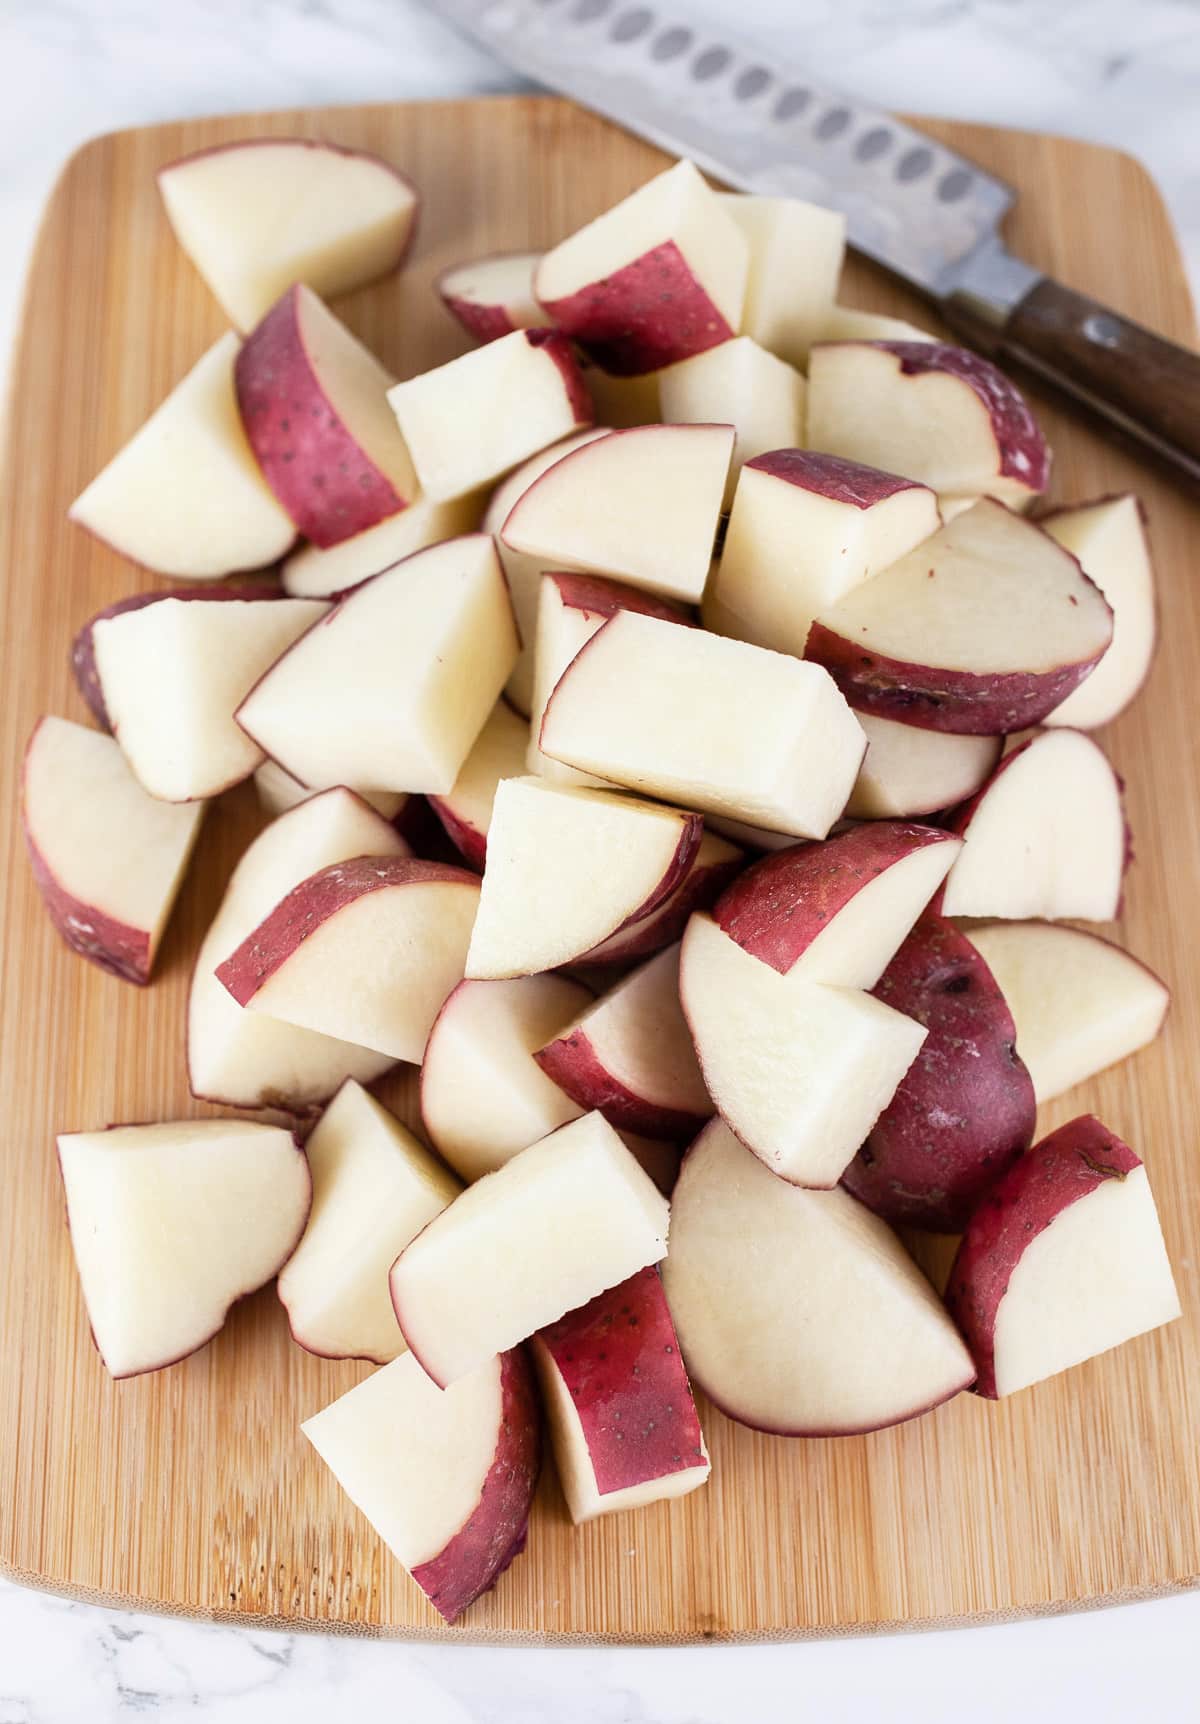 Diced red potatoes on wooden cutting board with knife.